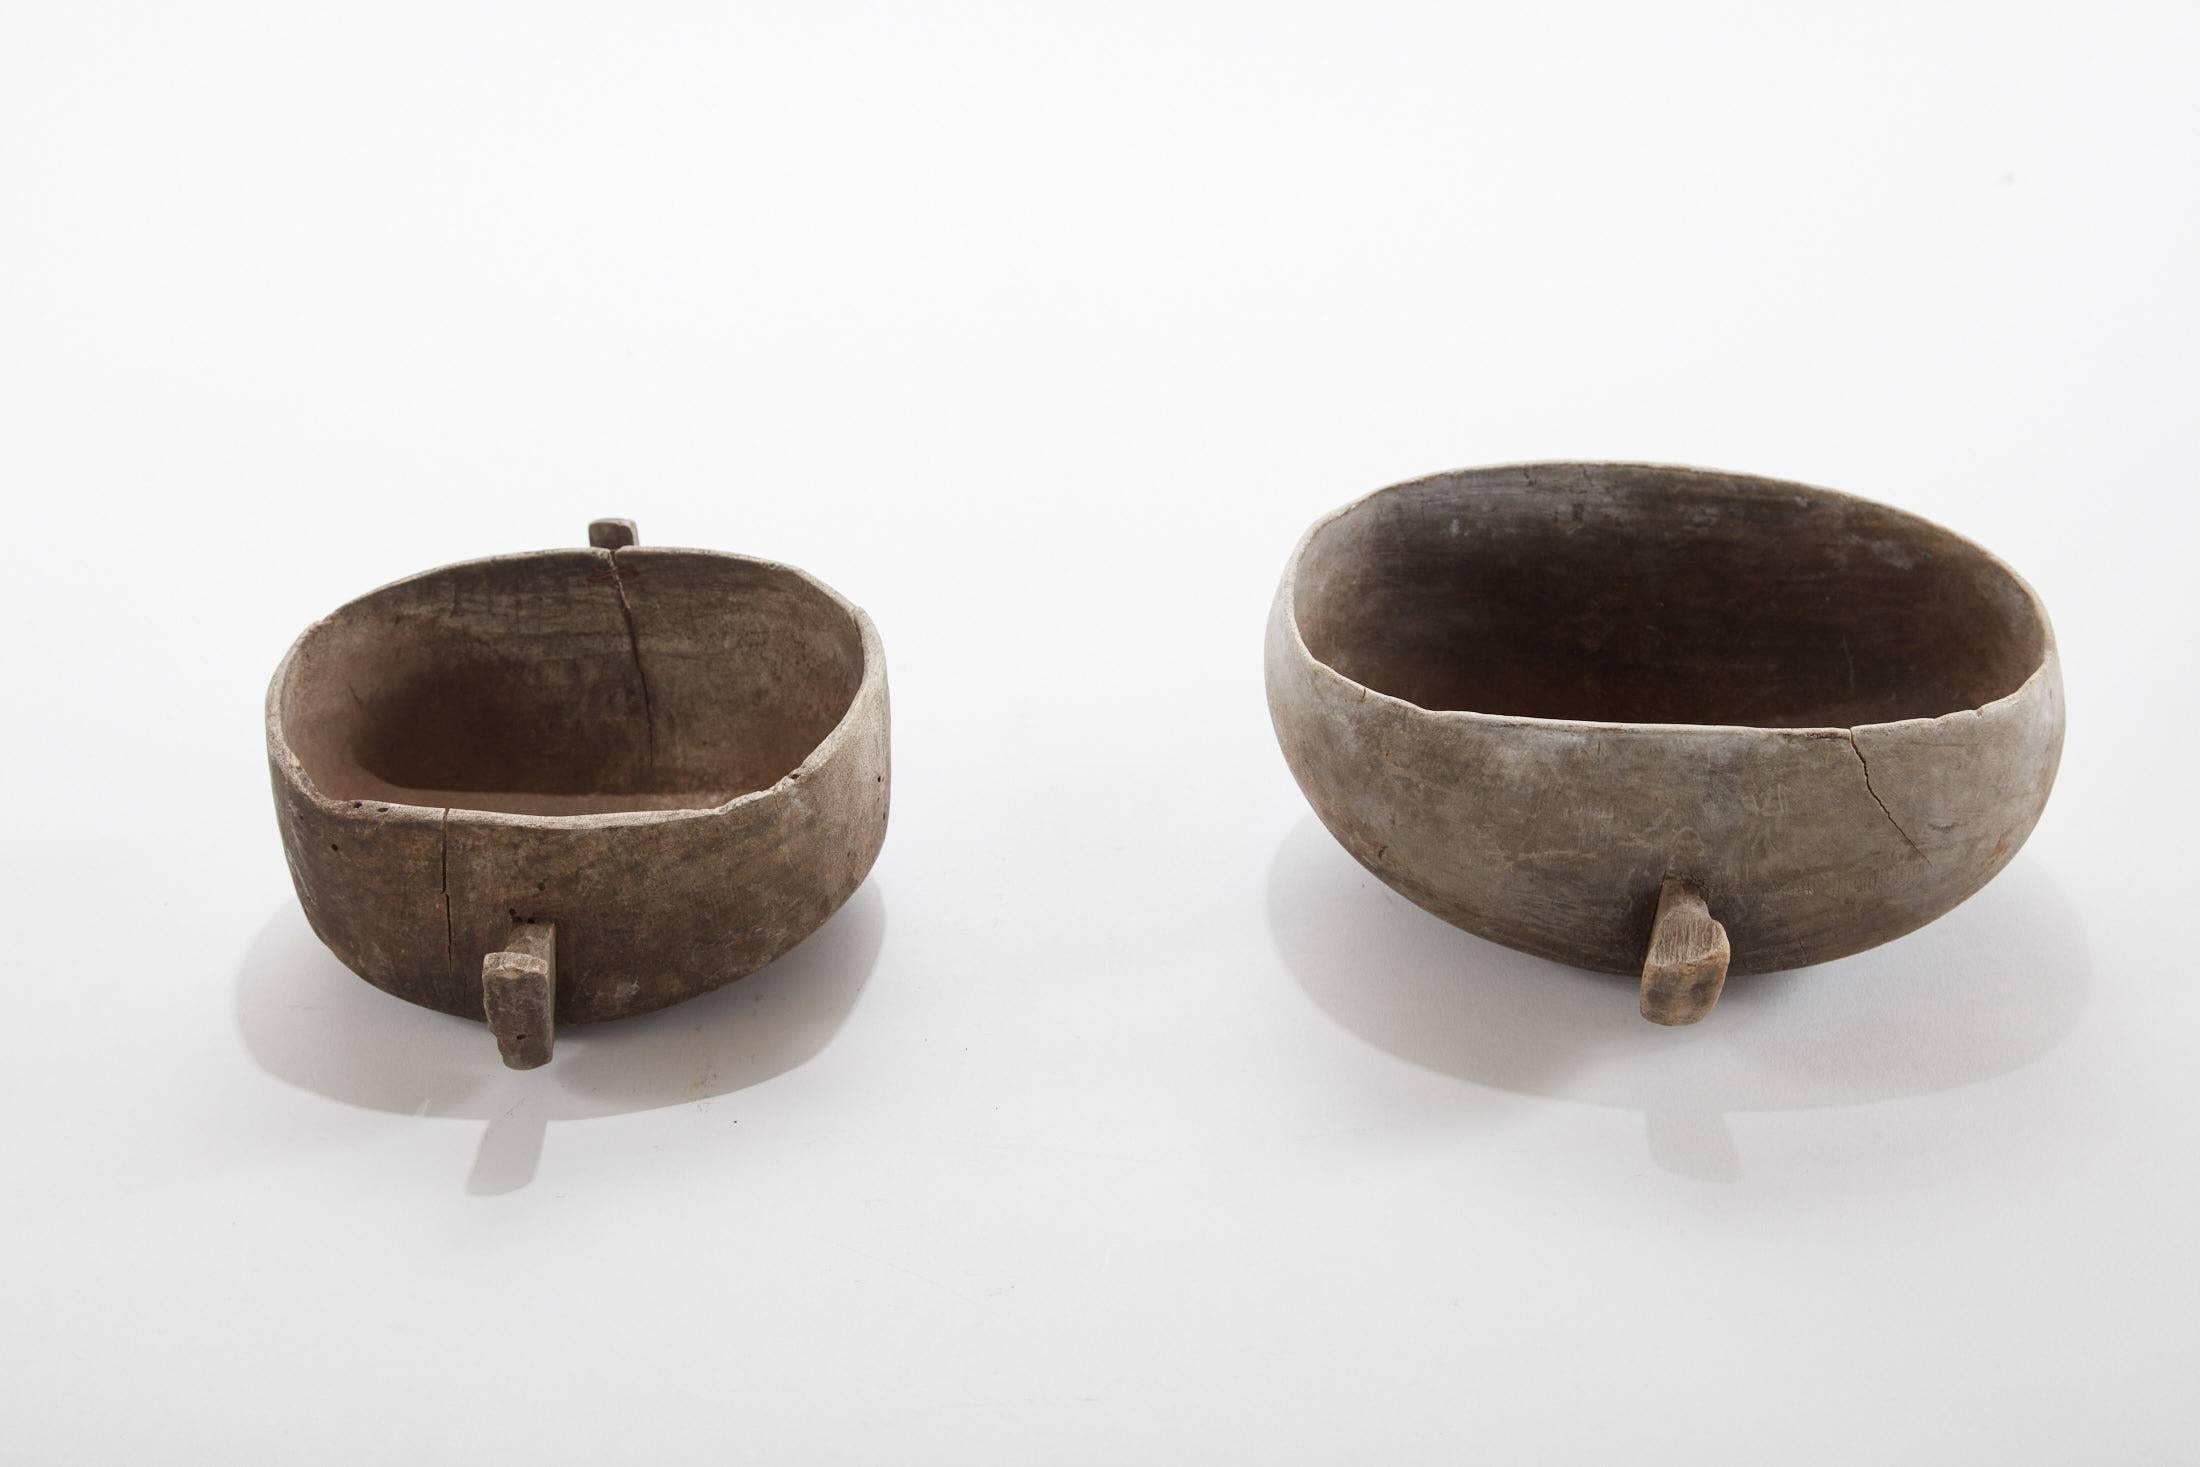 20th century East African grain bowls with handles pair (two pieces in set).

From left to right
A) 10.5